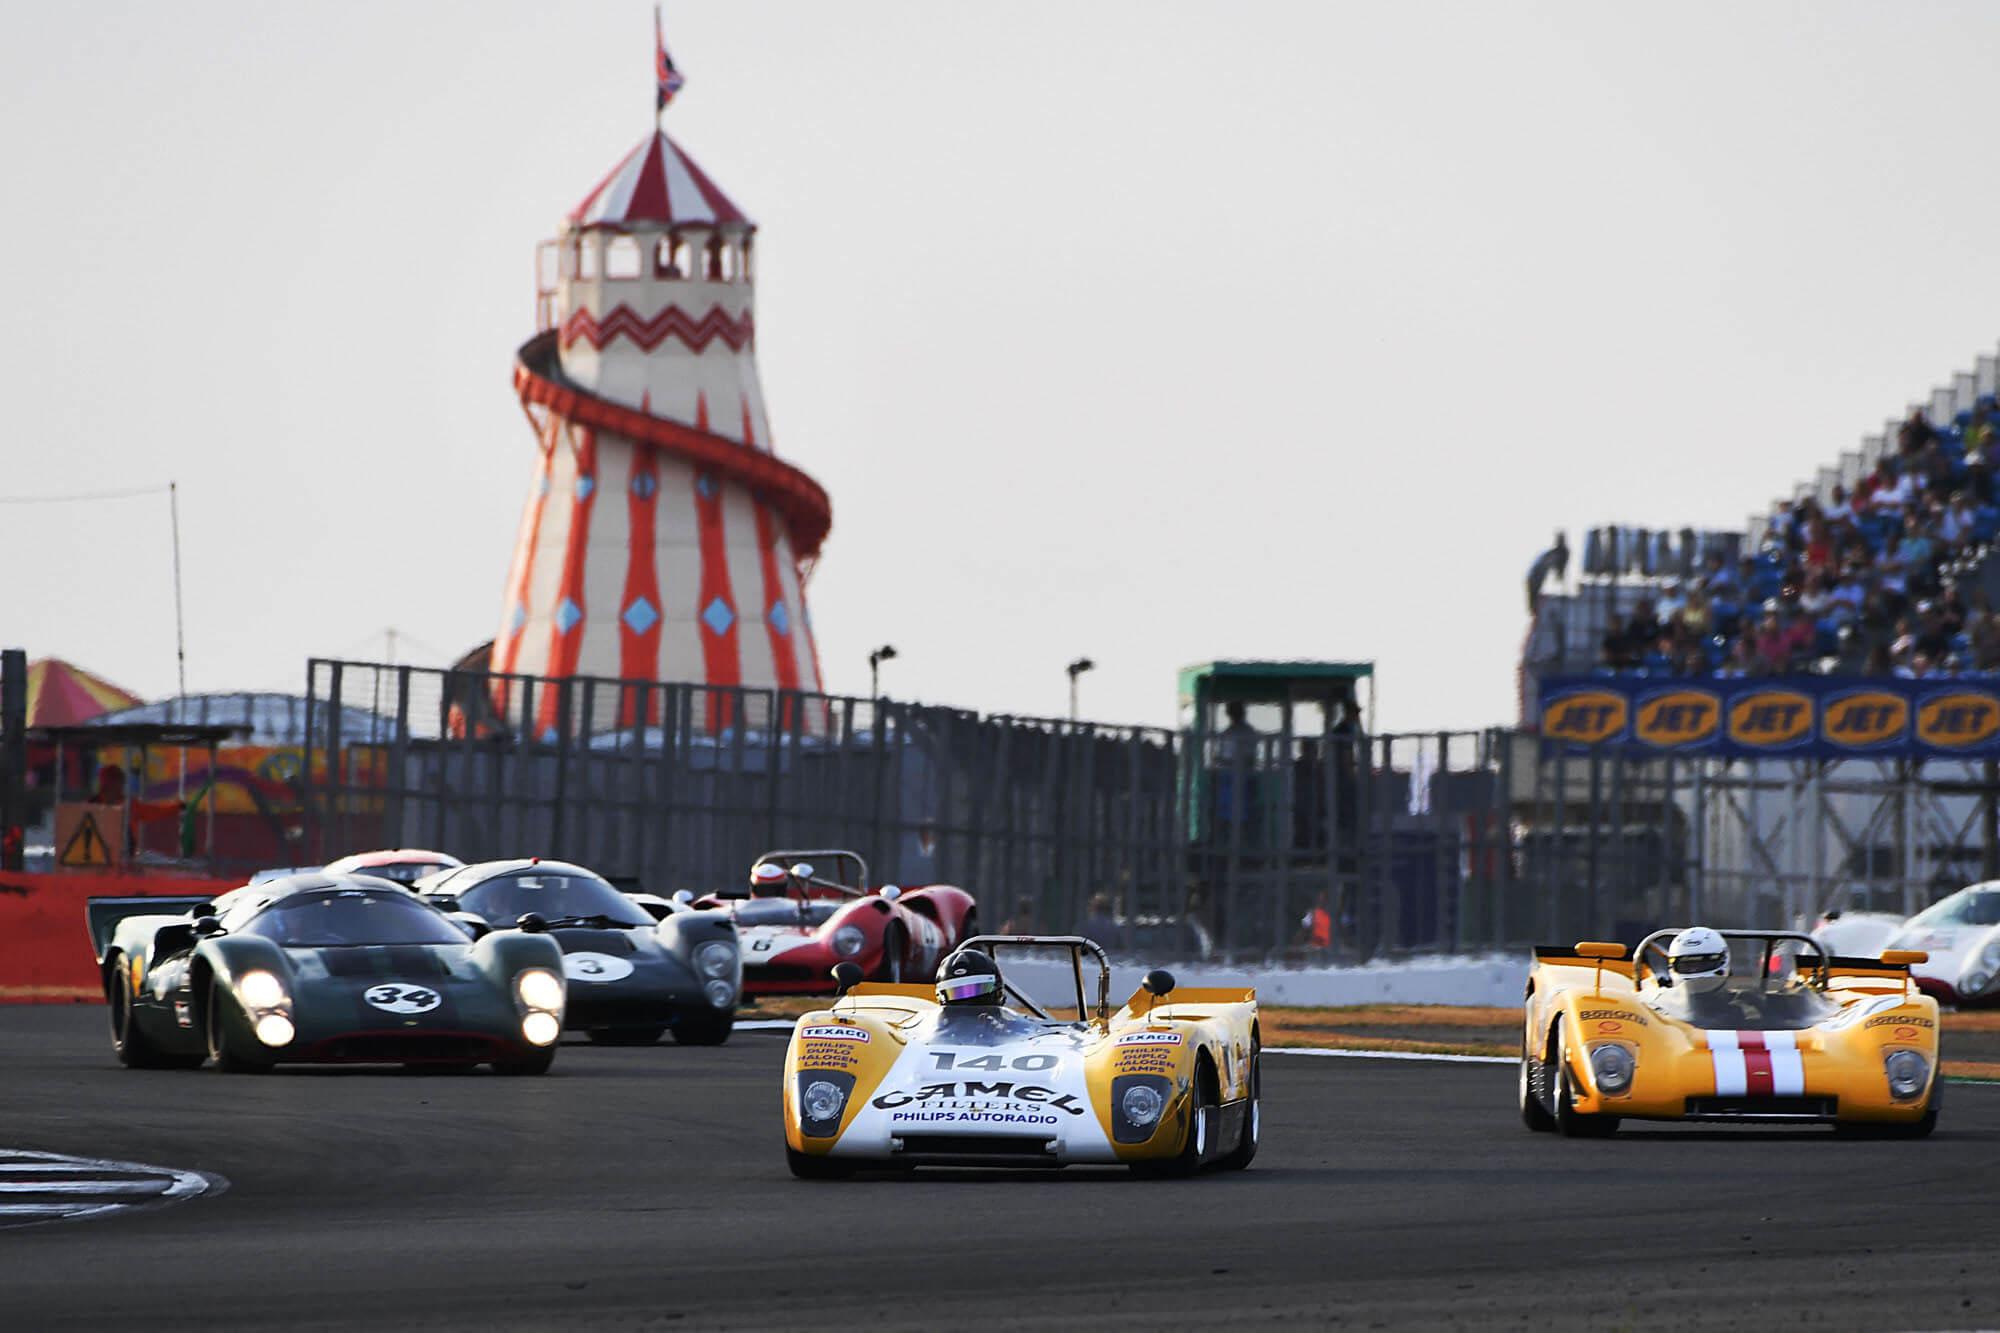 Six cars racing in the Masters Historic Sportscars grid at The Classic at Silverstone with the helter skelter in the background